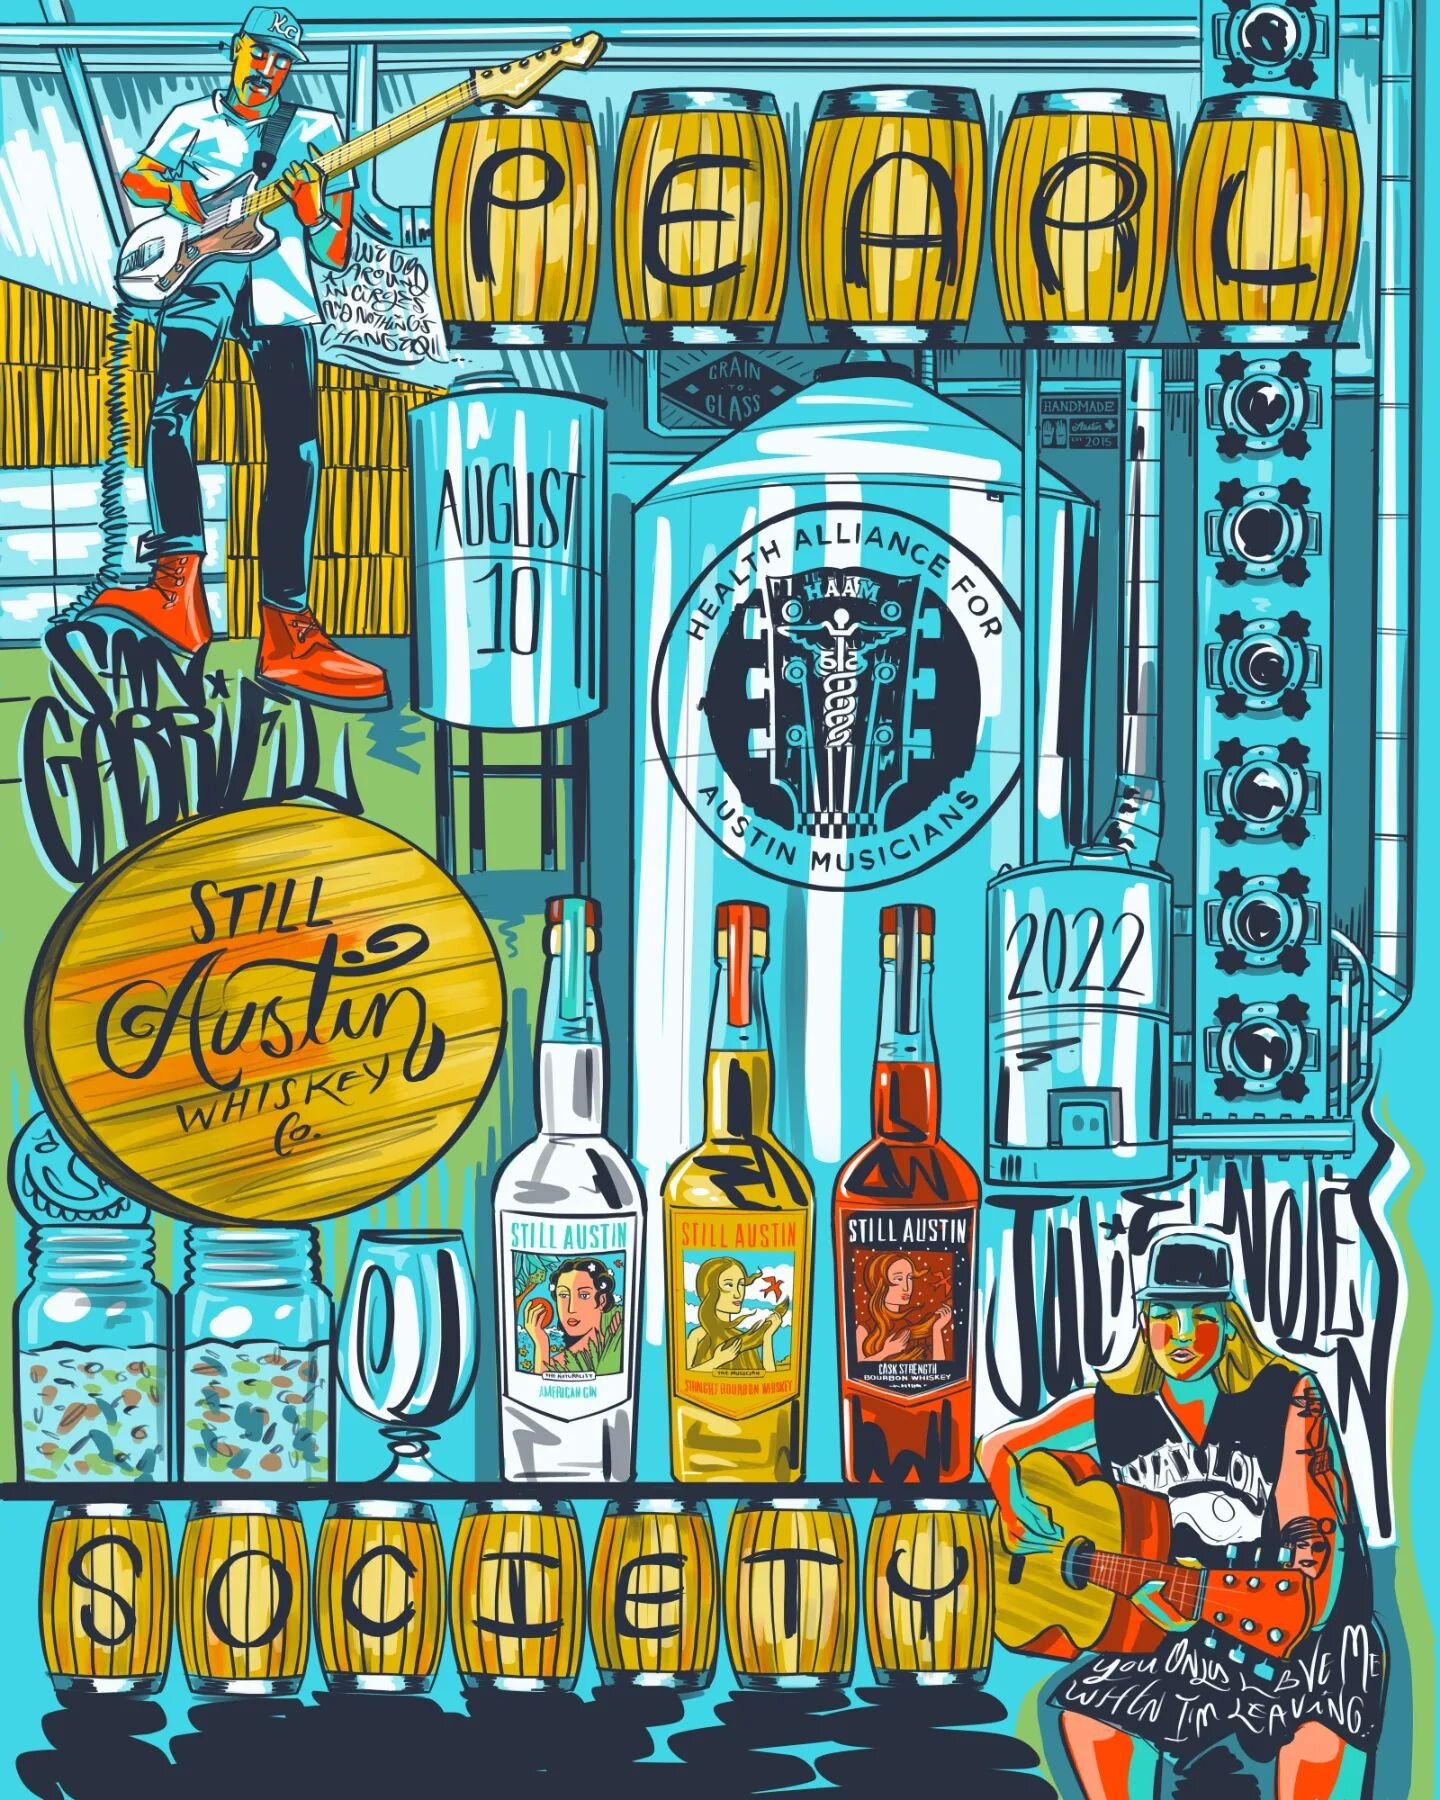 Another great @myhaam #PearlSociety event this week hosted by @stillatx and @siteatx with the #gigposter illustrated by @amirocks73 ! We think it is our favorite in the series so far and Ami had a great time getting into the drawing of all the cool #